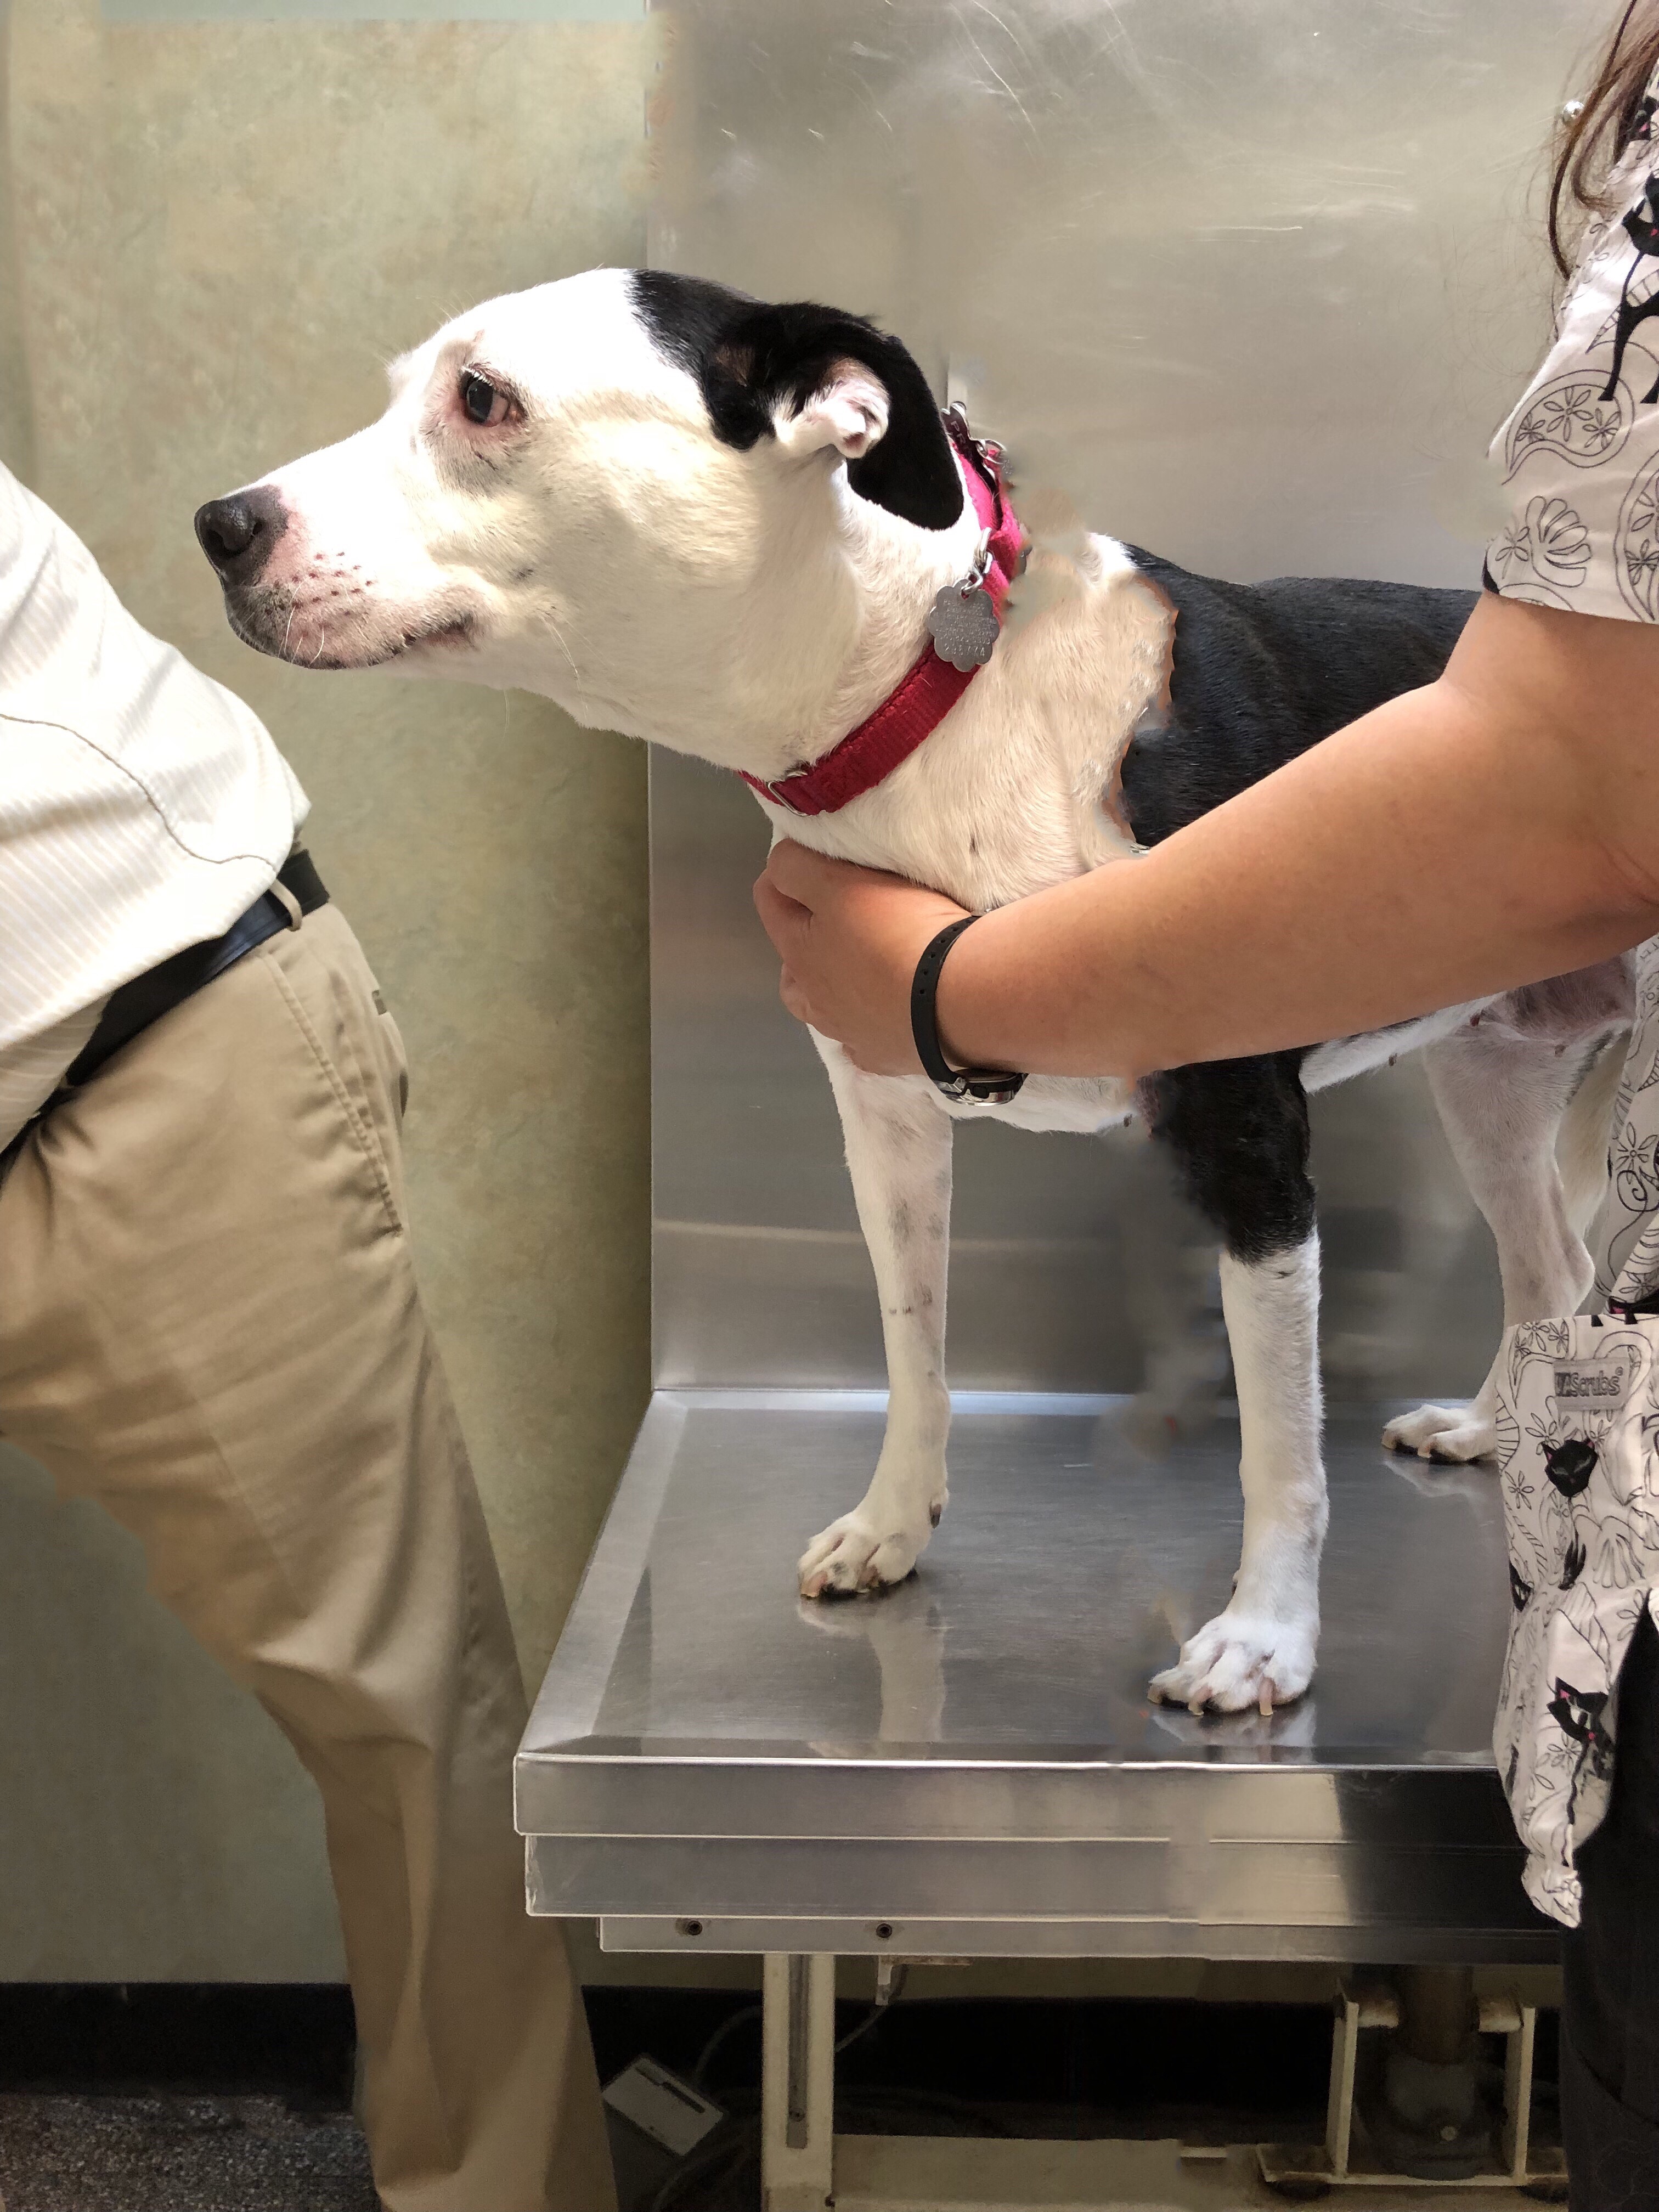 Does PetSmart Perform Vaccinations for Dogs? FindReviews